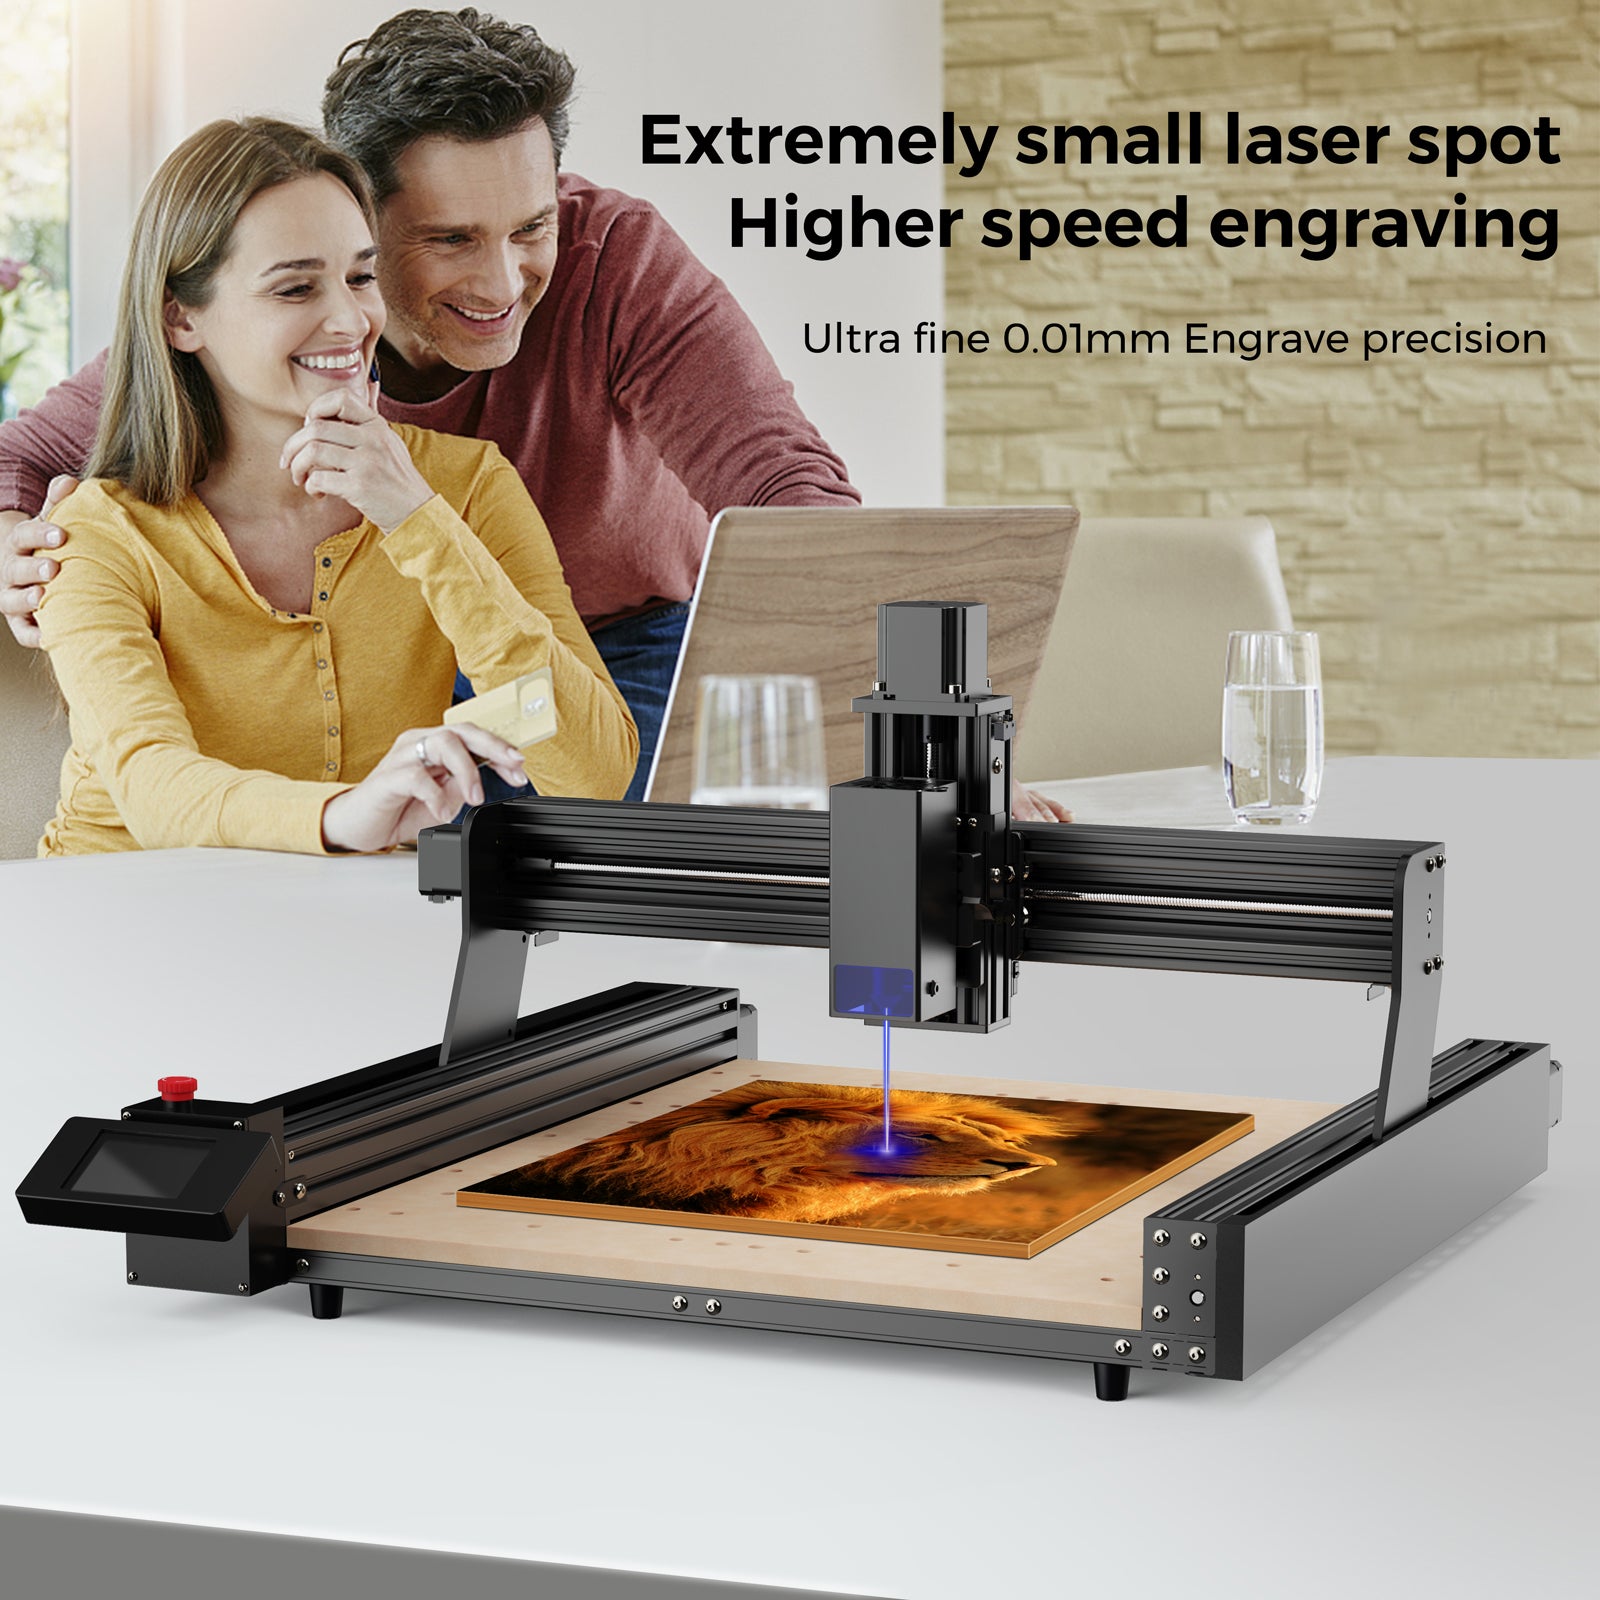 Circular Laser Head 2.5w/5.5w for CNC Engraving Machine – TwoTrees Official  Shop